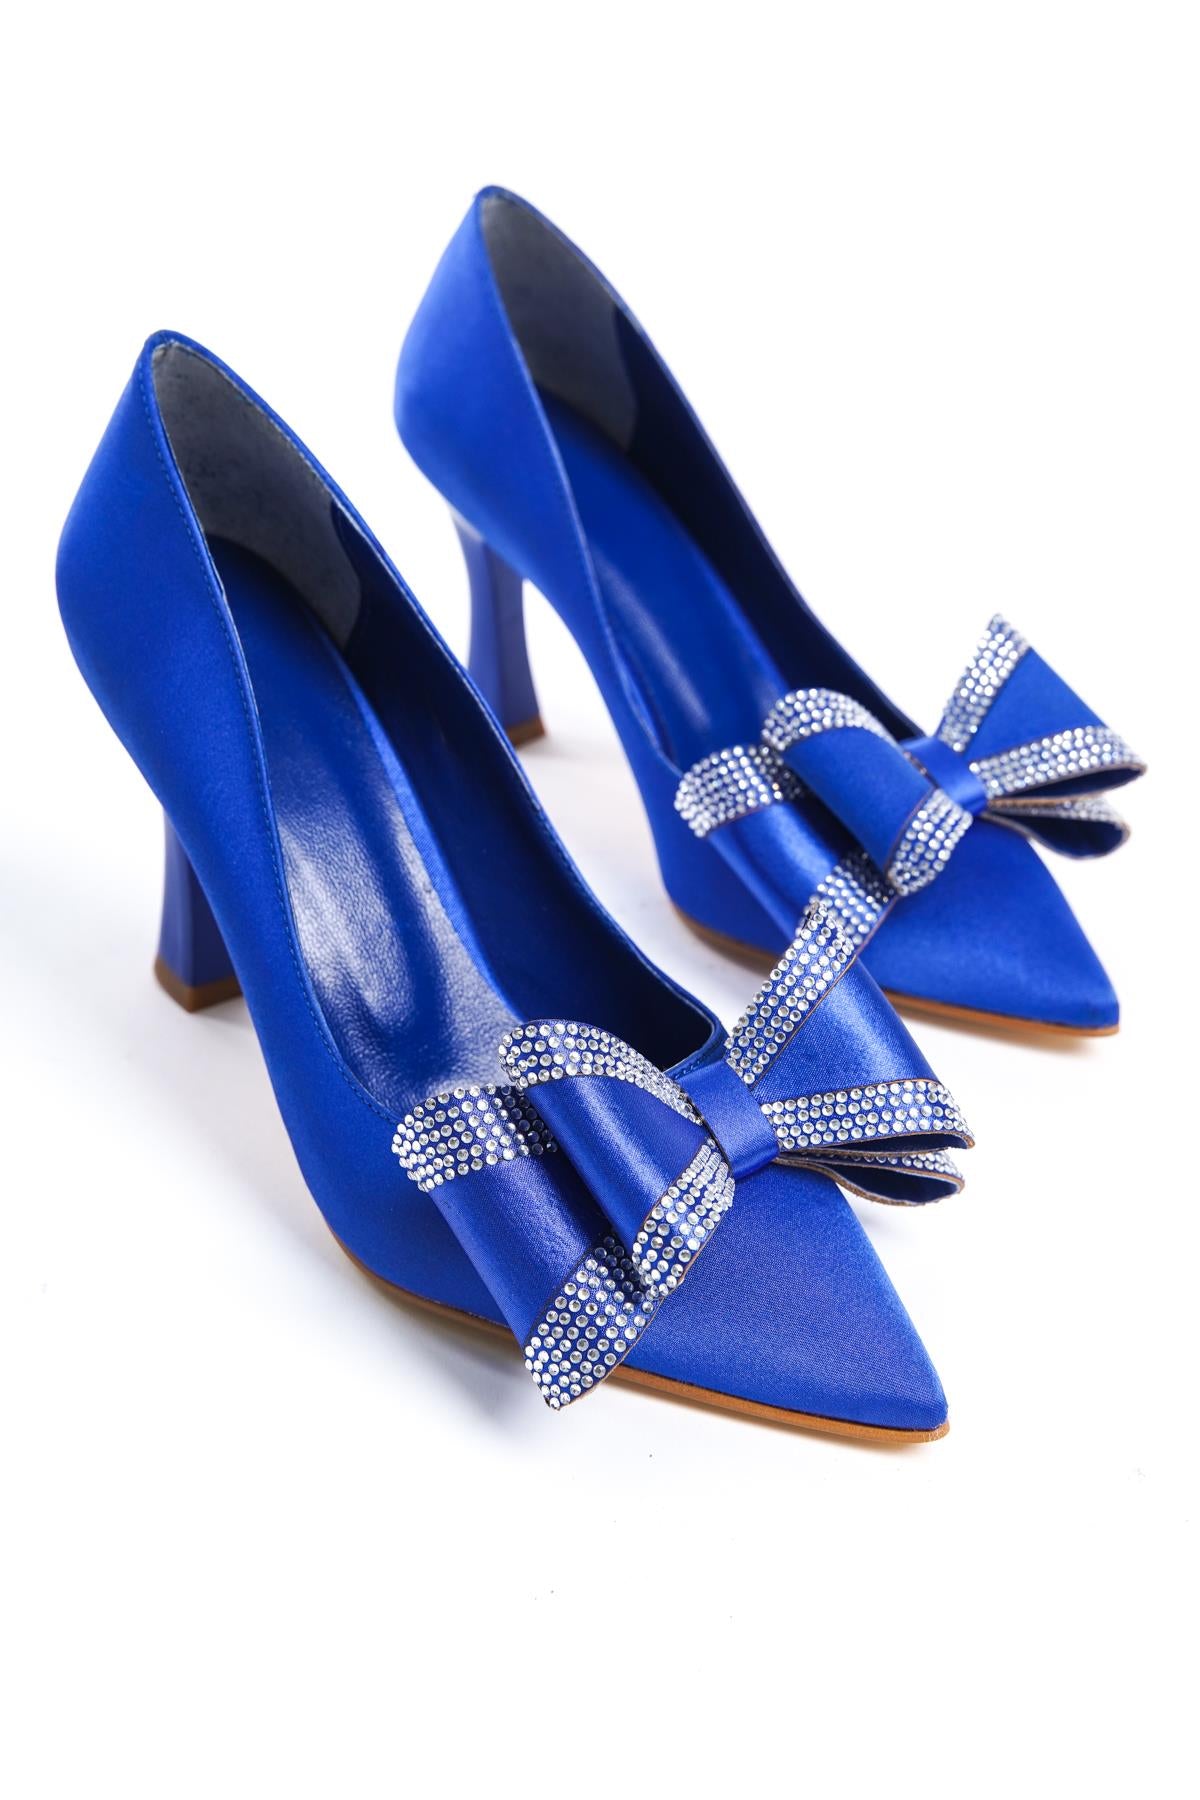 Women's Blue Fasm Satin Painted Heel Bow Detailed Evening Dress Shoes - STREETMODE ™